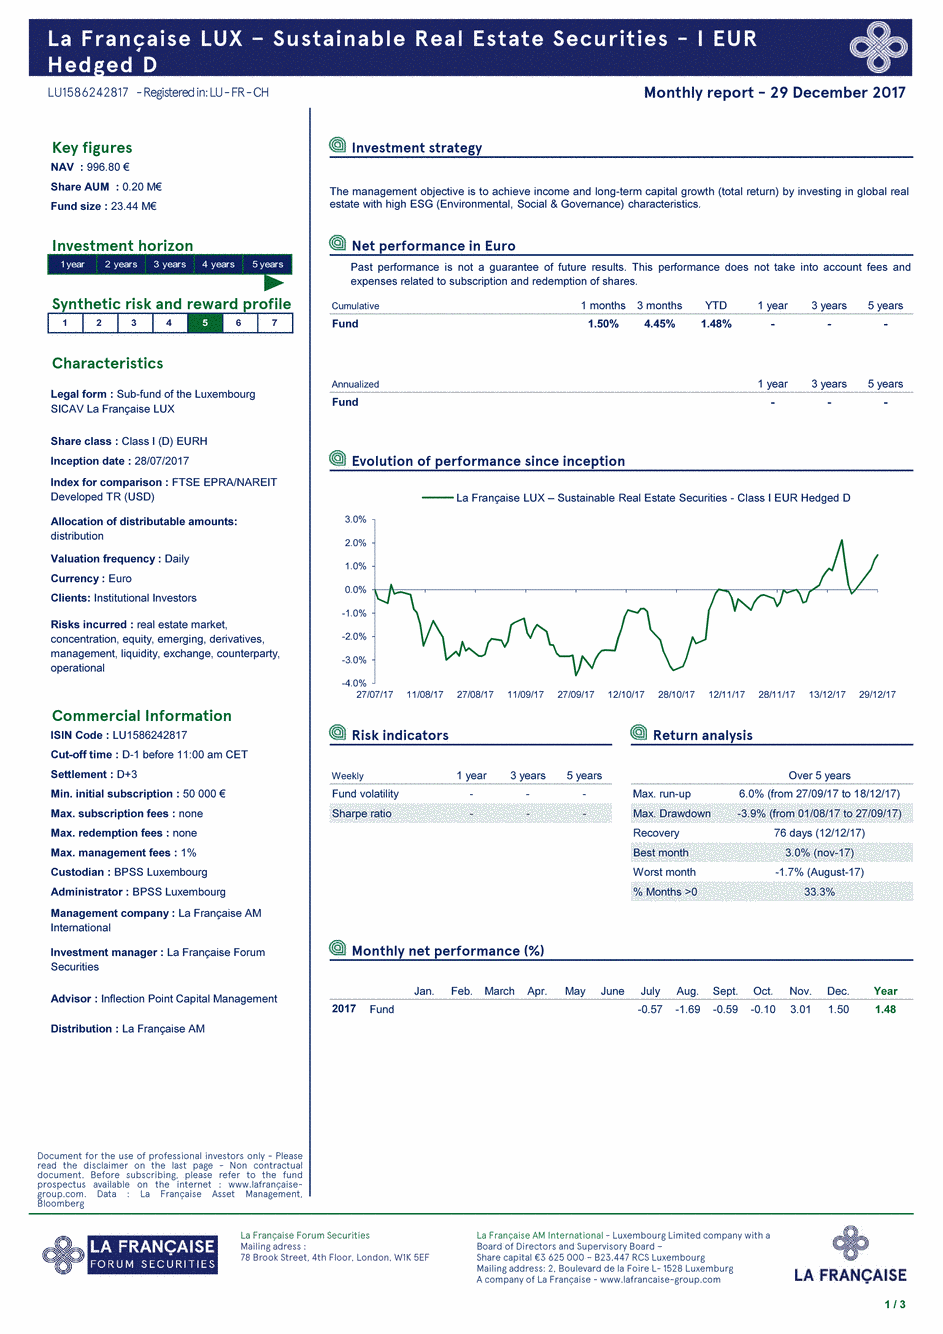 Reporting La Française LUX - Sustainable Real Estate Securities - Class I EUR Hedged D - 31/12/2017 - English